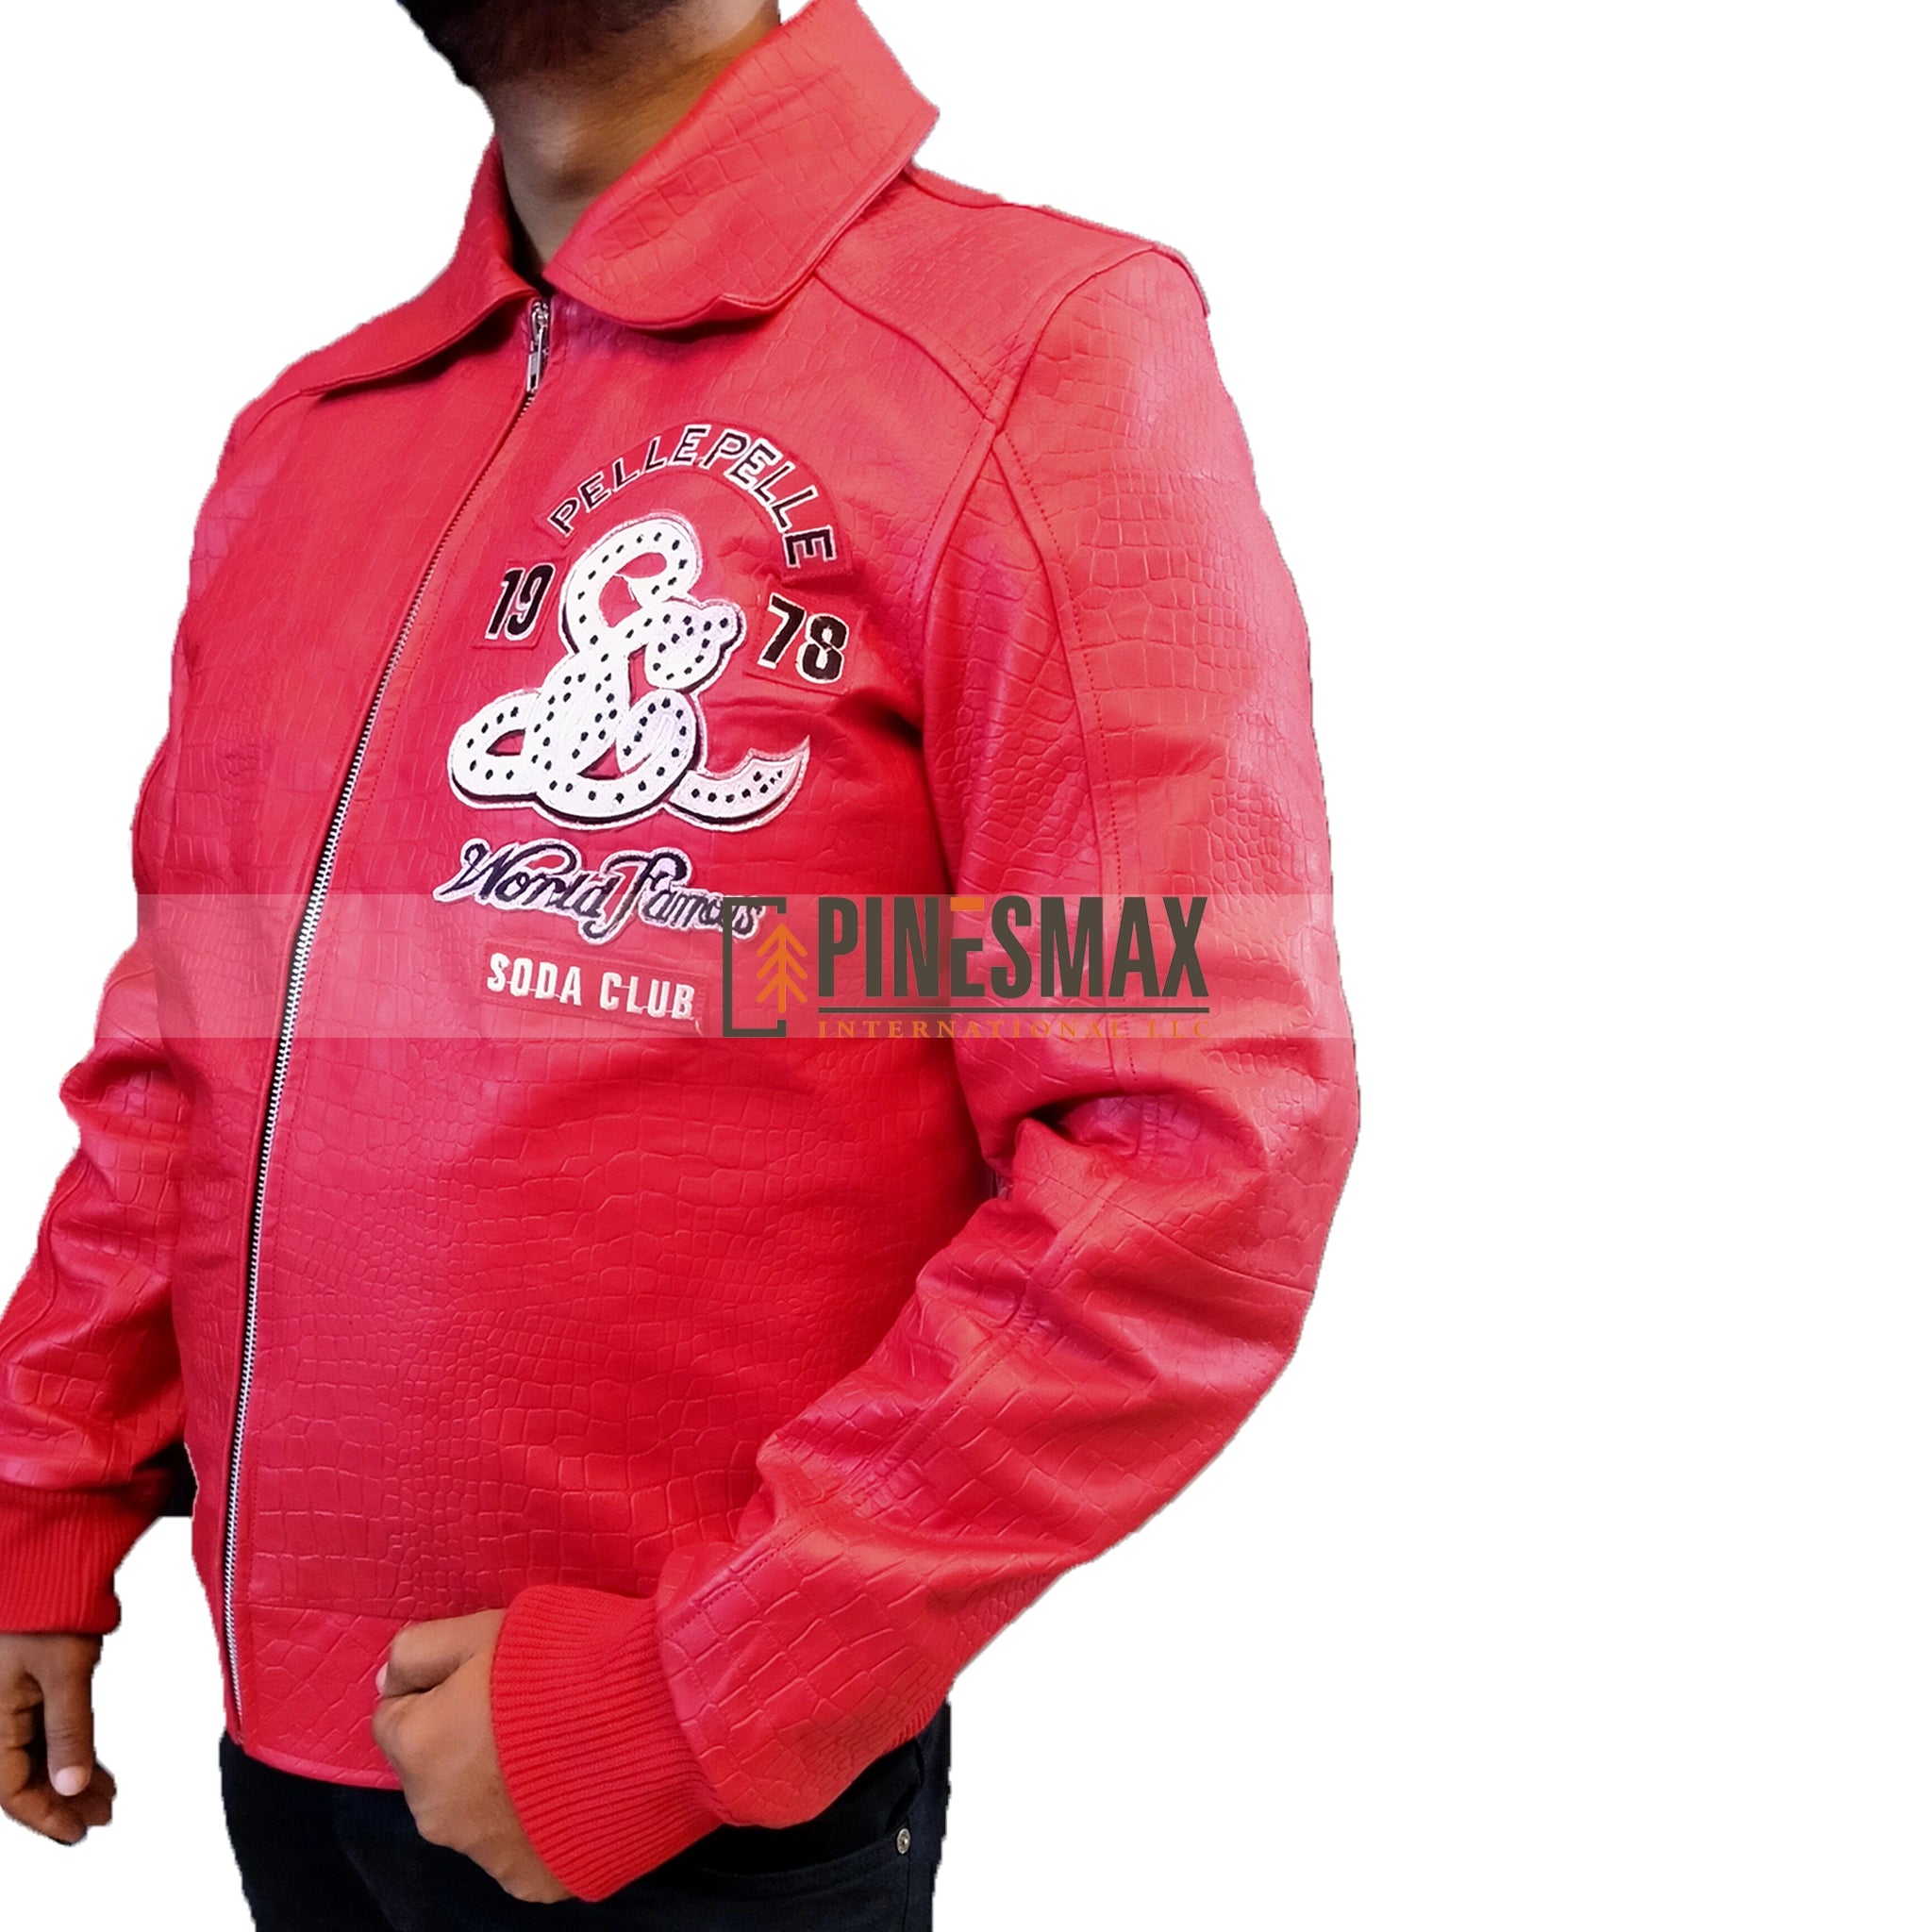 Pelle Pelle Soda Club Red Leather Jacket - PINESMAX